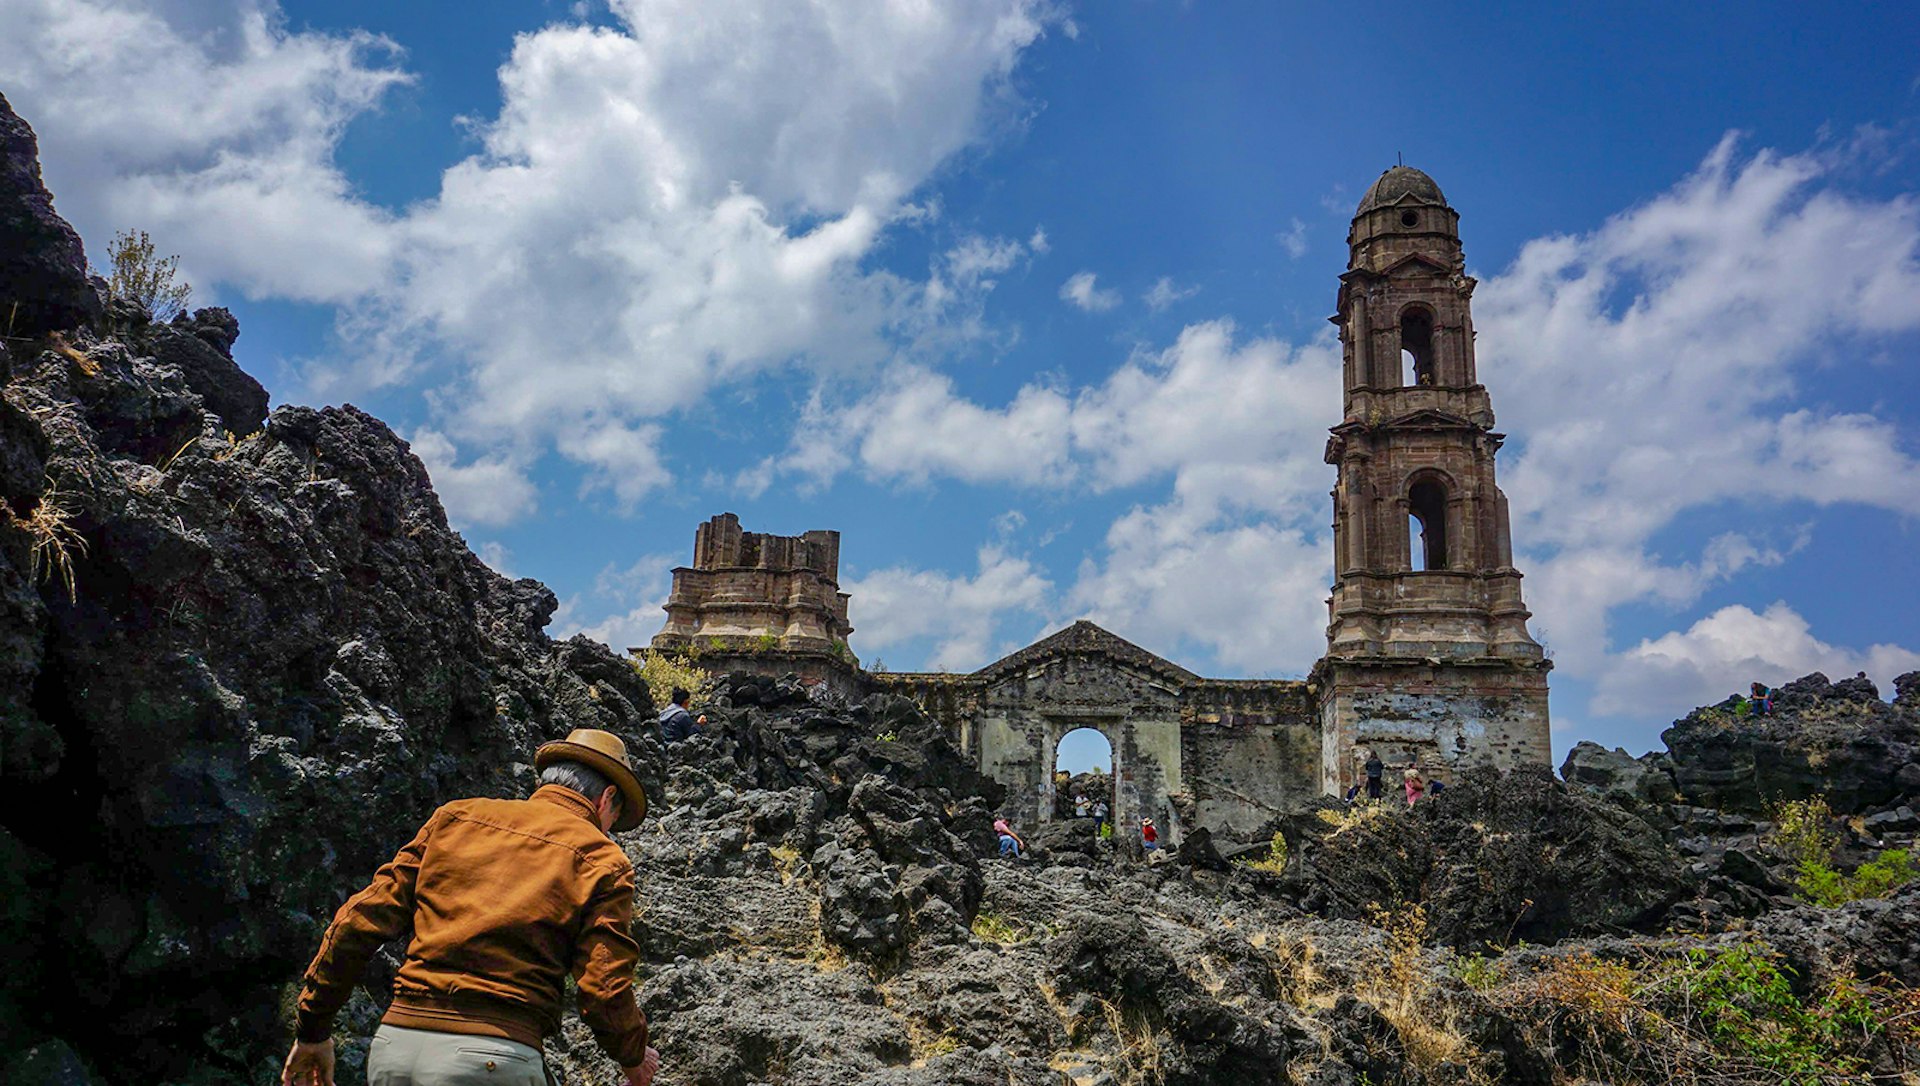 A man in an orange jacket and fedora walks towards a church ruin in a lava field in Central Mexico